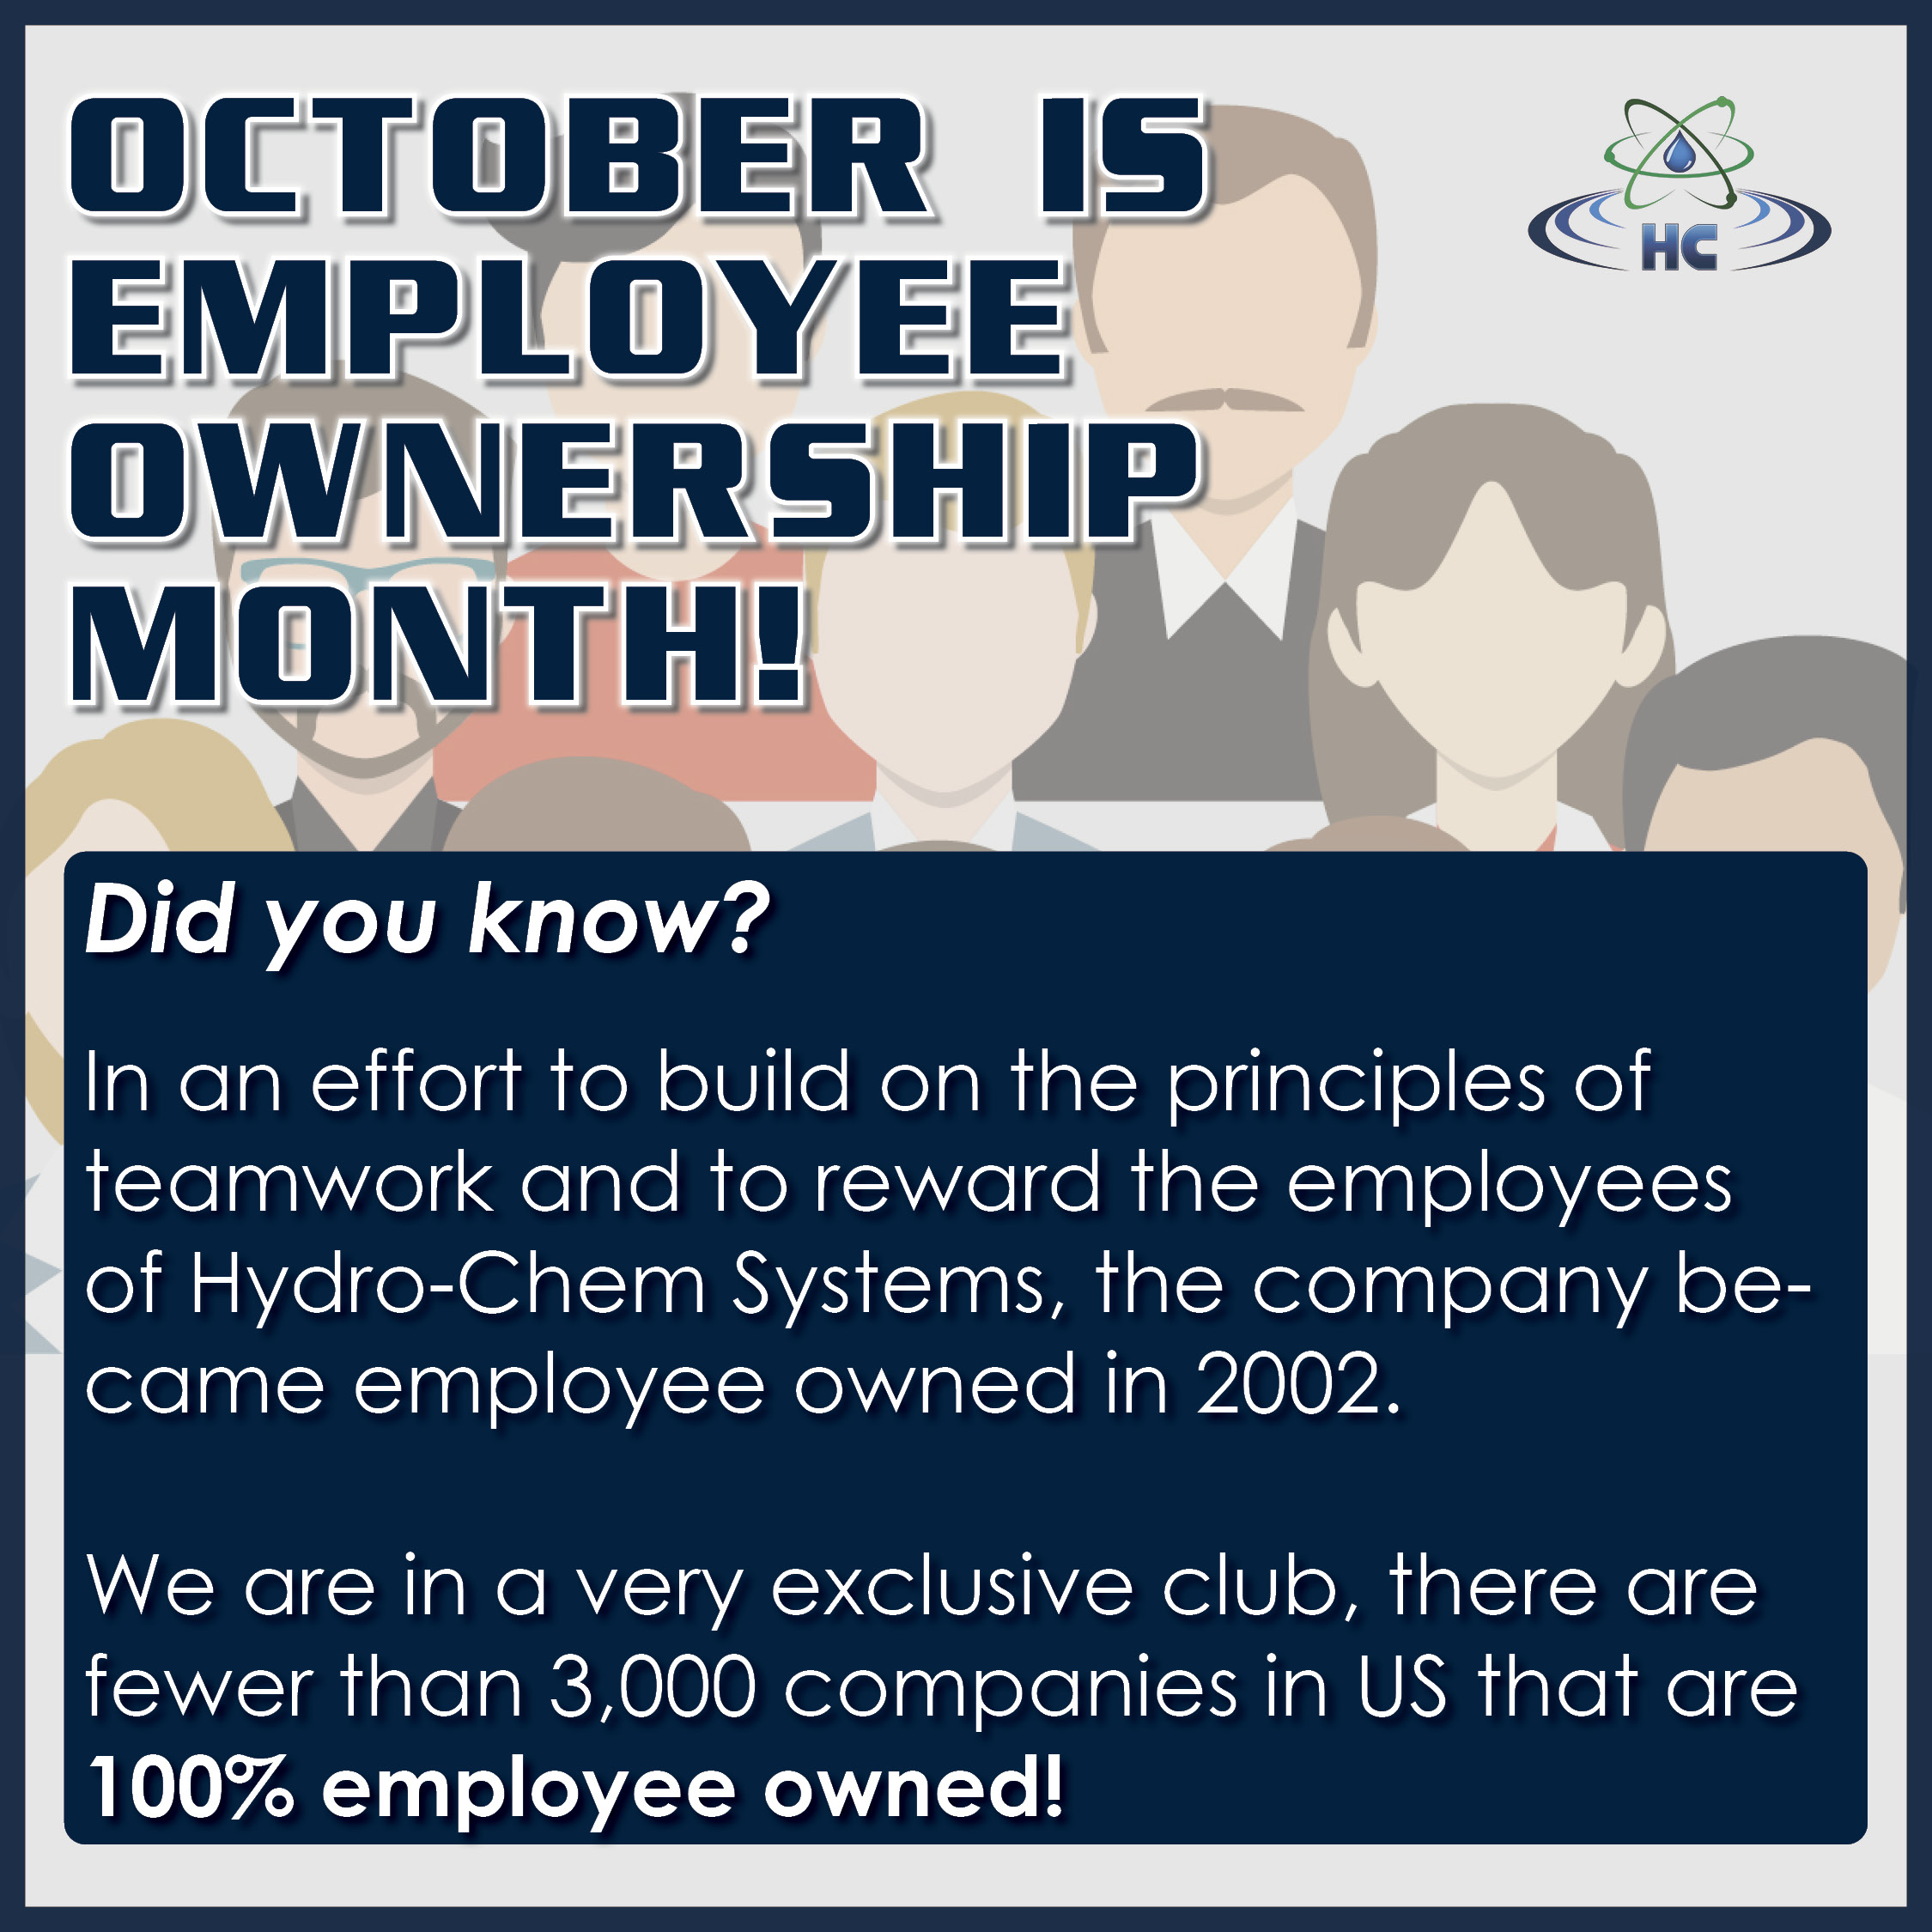 Did you know? In an effort to build on the principles of teamwork and to reward the employees of hydro-chem systems, the company became employee owned in 2002. We are in a very exclusive club, there are fewer than 3,000 companies in the US that are 100% employee owned. 